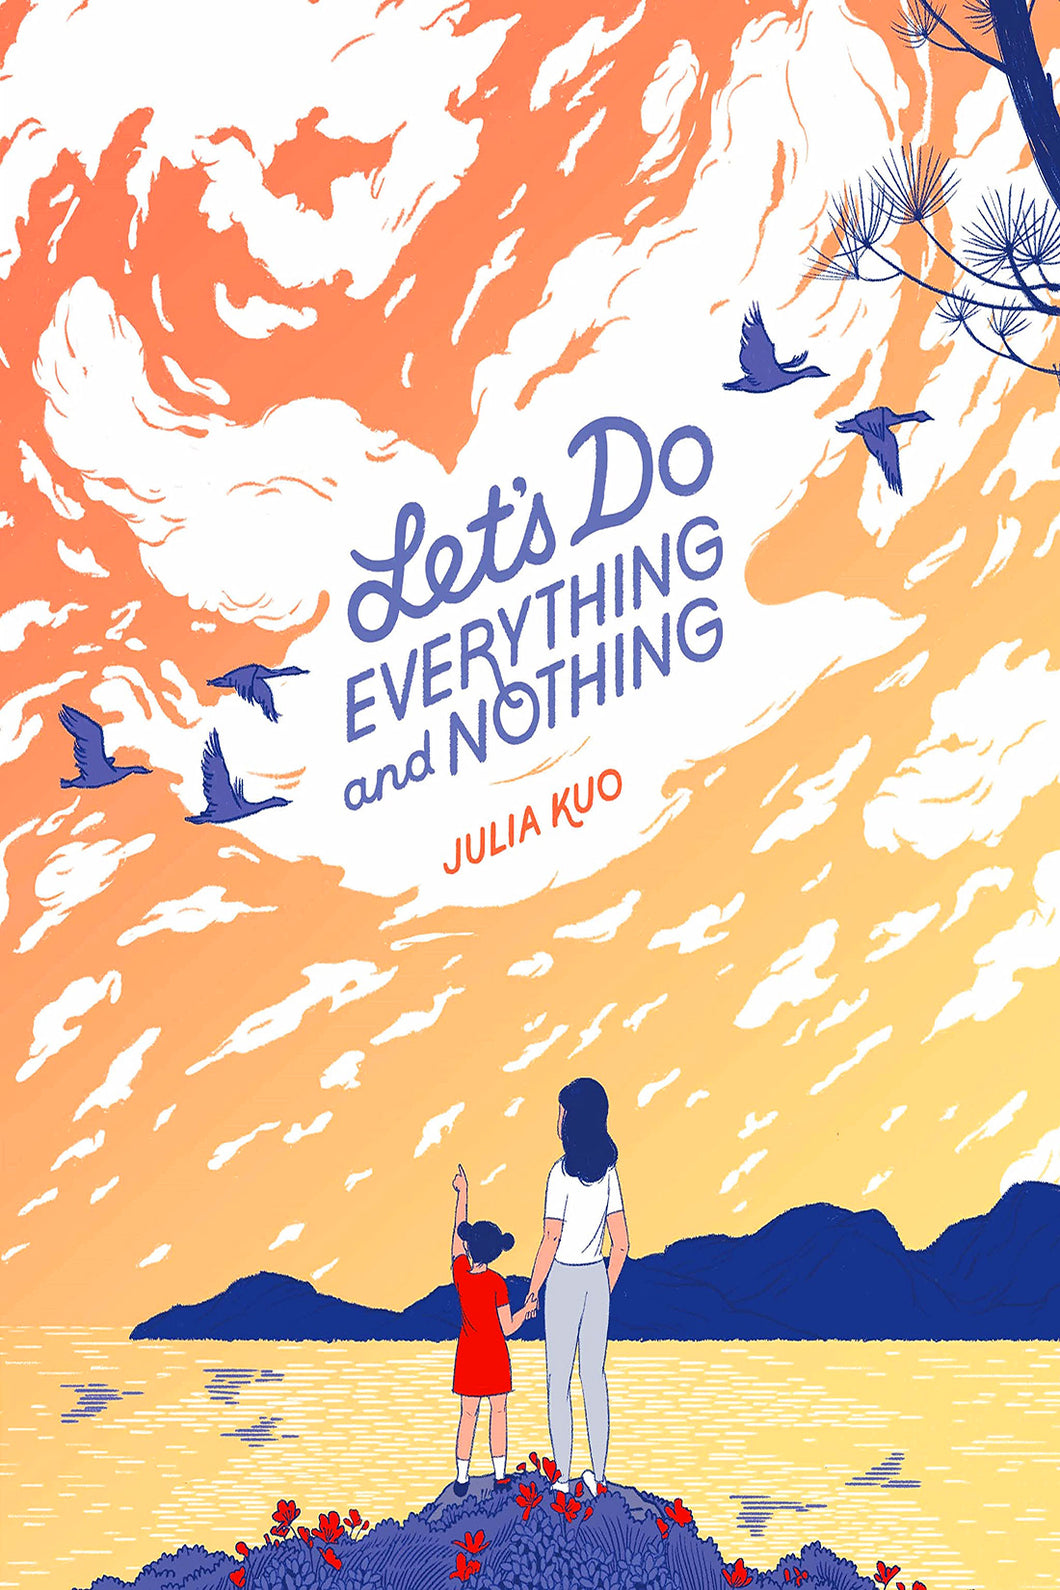 Let's Do Everything and Nothing by Julia Kuo / Hardcover - NEW BOOK